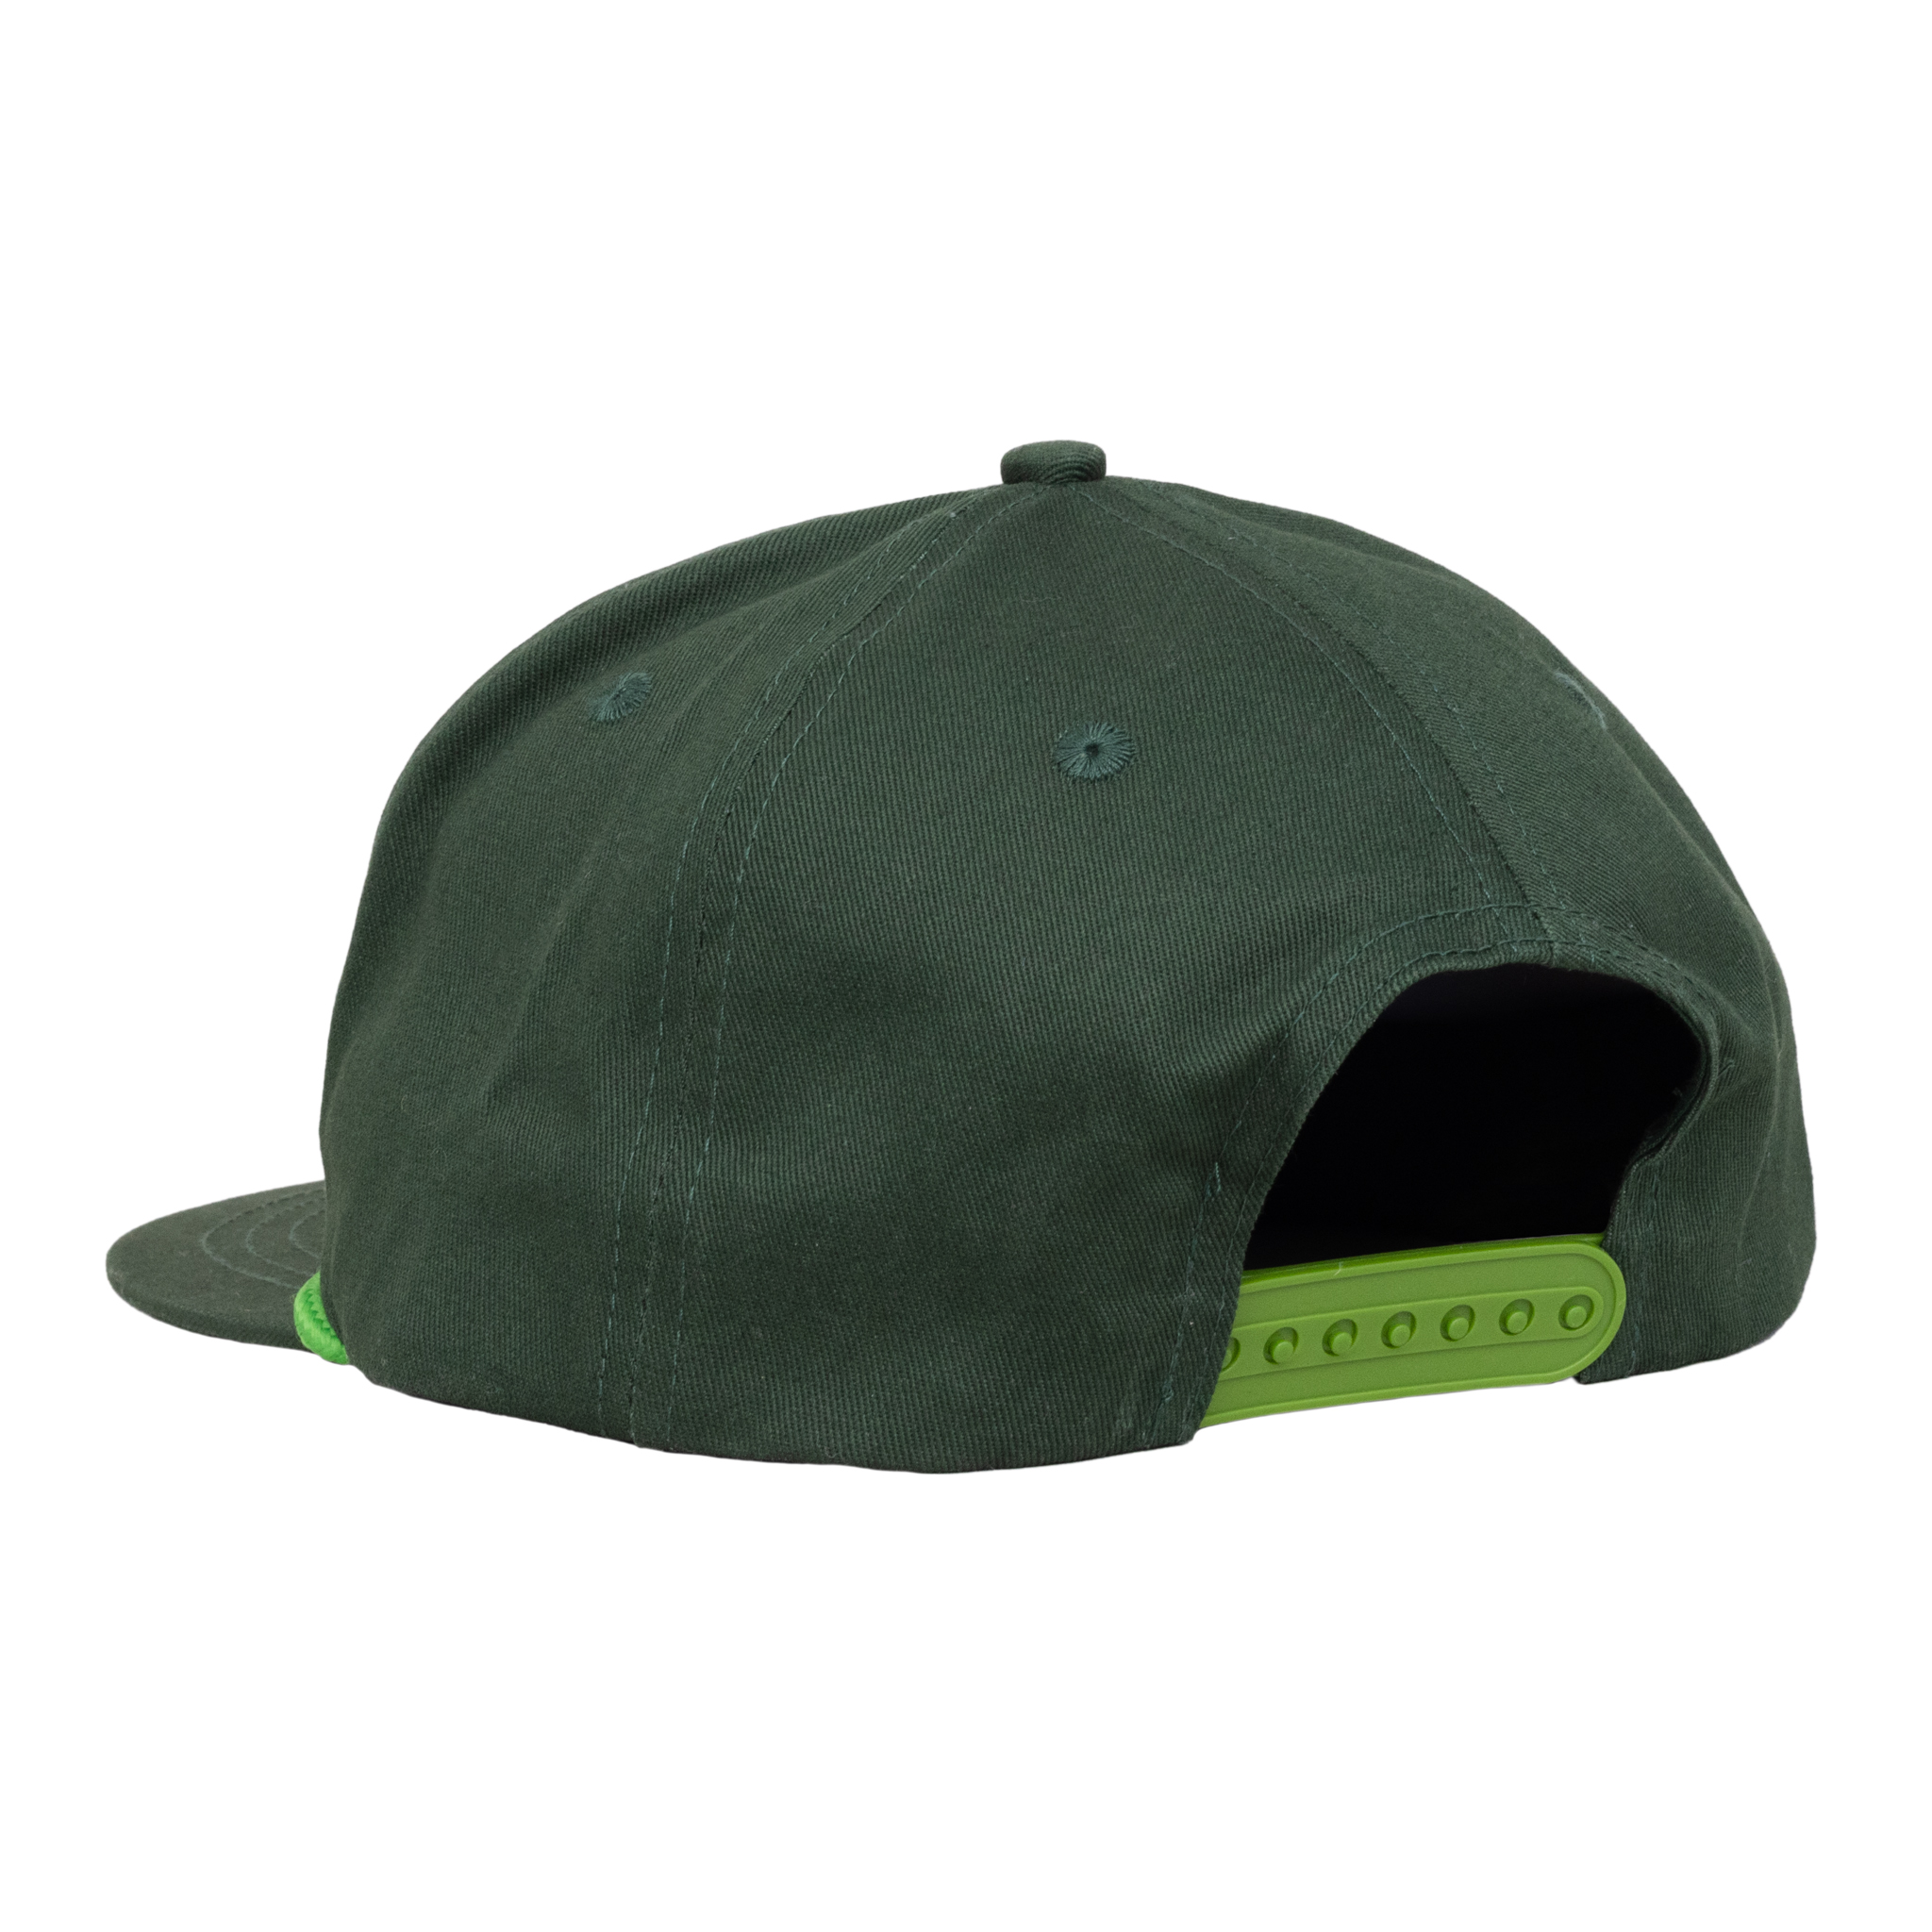 Sierra Nevada Brewing Co. Pale Ale Hat - back view showing snapback closure